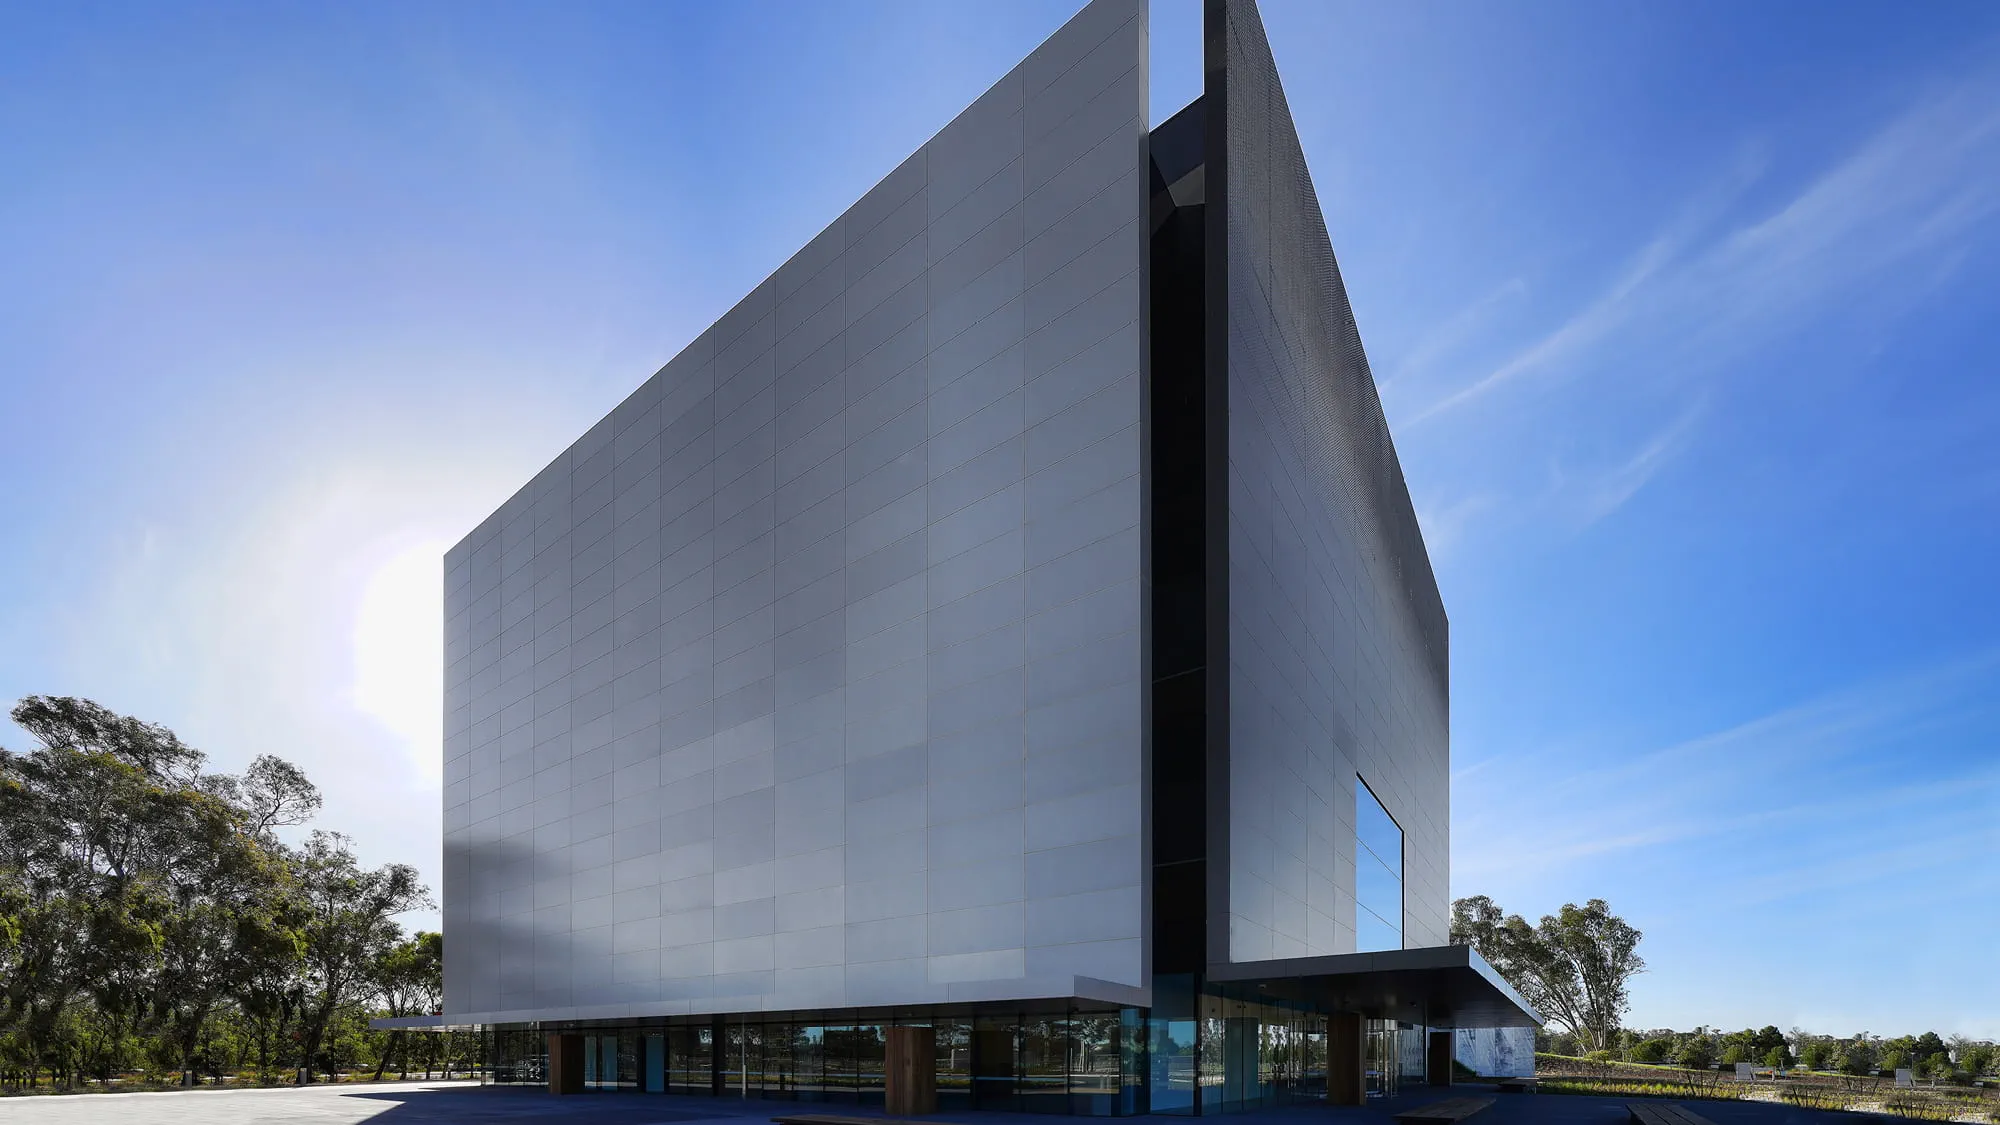 Day time view of the striking Shepparton Art Museum with 30 metre high façade plates